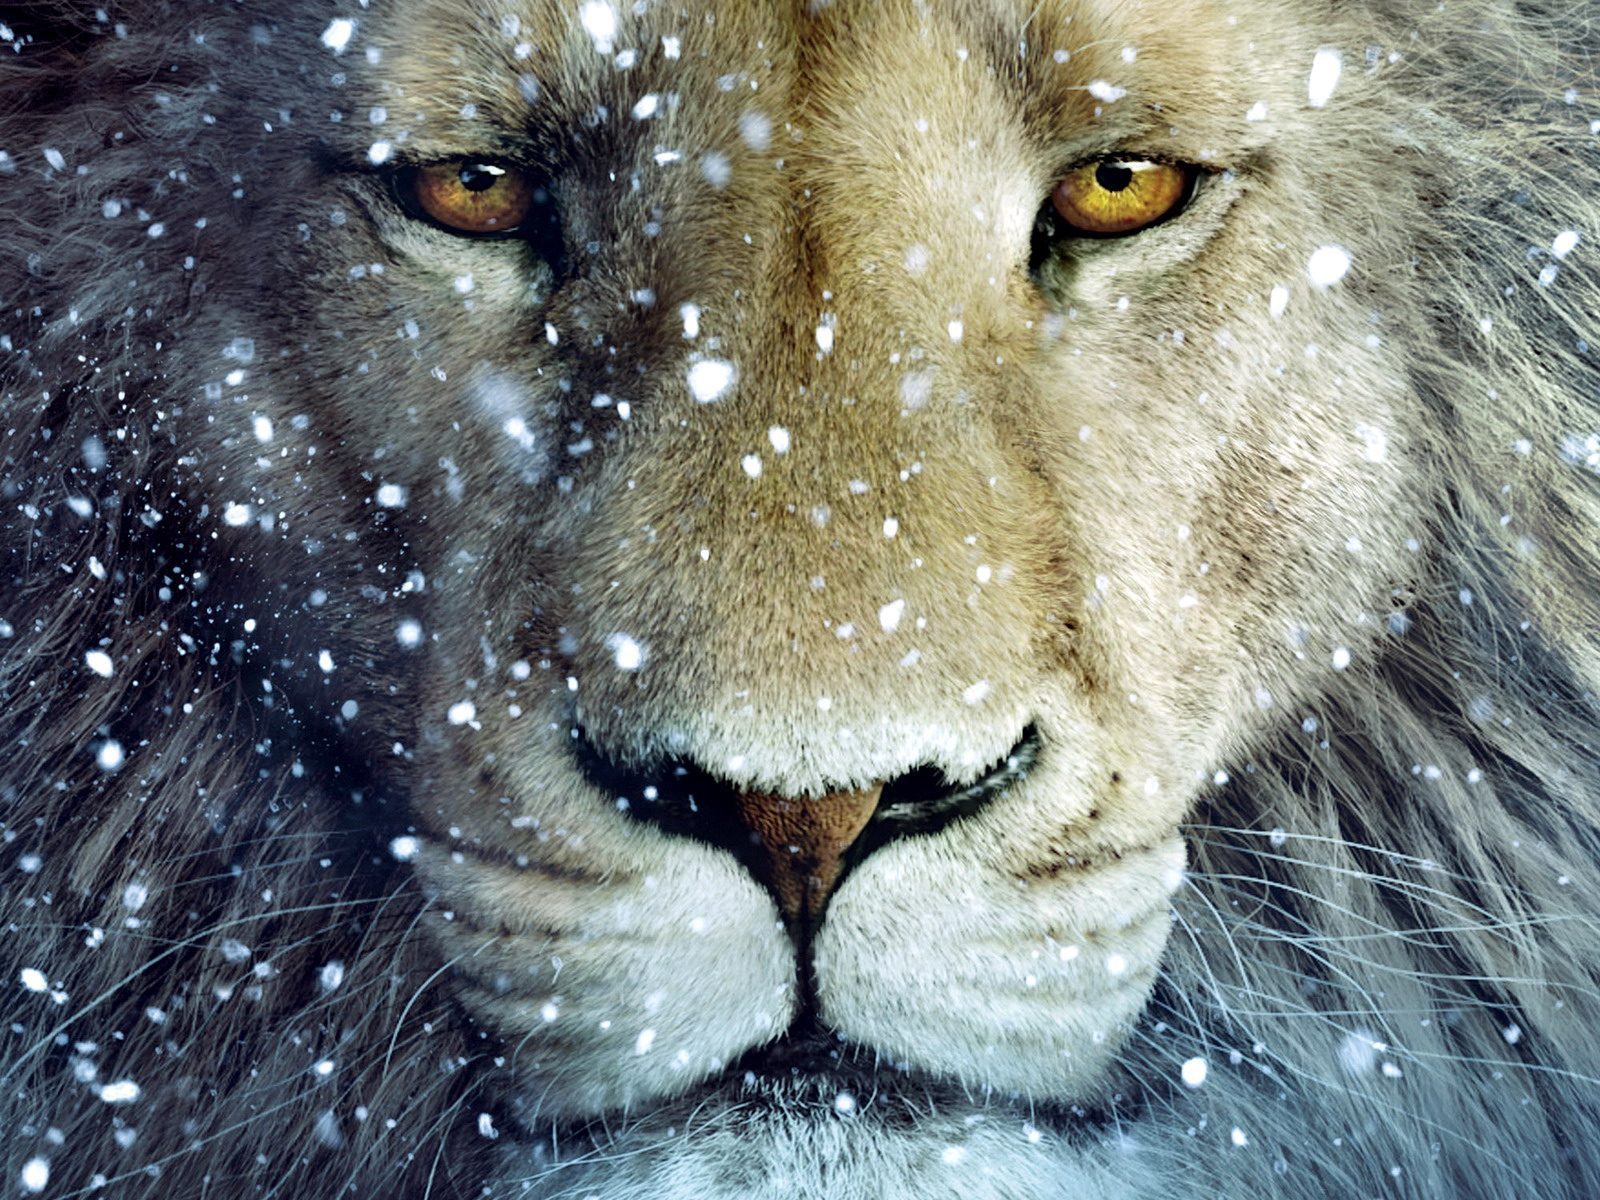 The Chronicles Of Narnia Image Wallpaper Photos